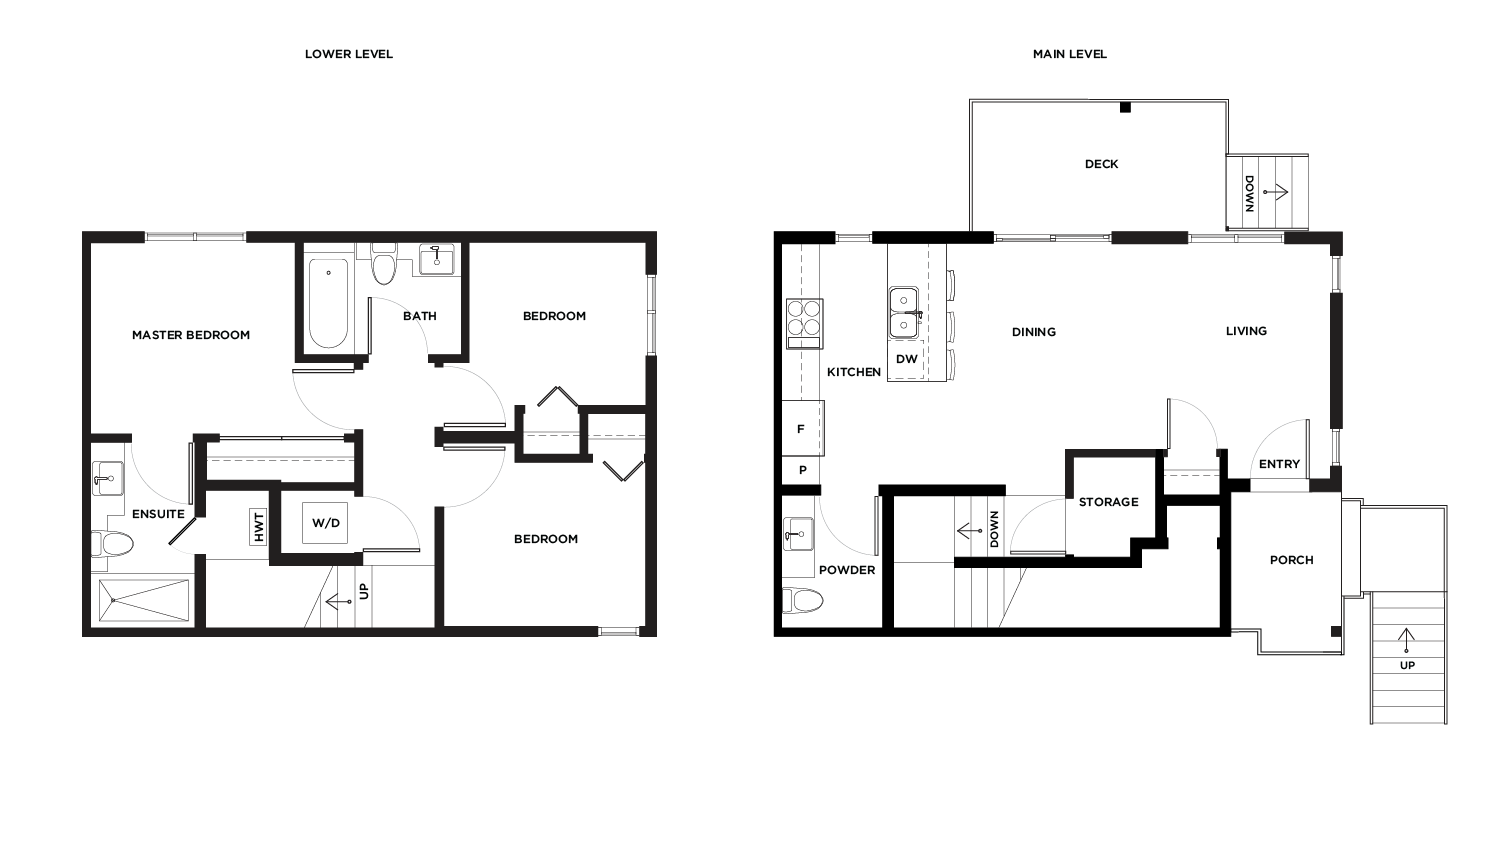 Ward D1/2 garden level floor plan for Vicini Homes Vancouver townhouses.